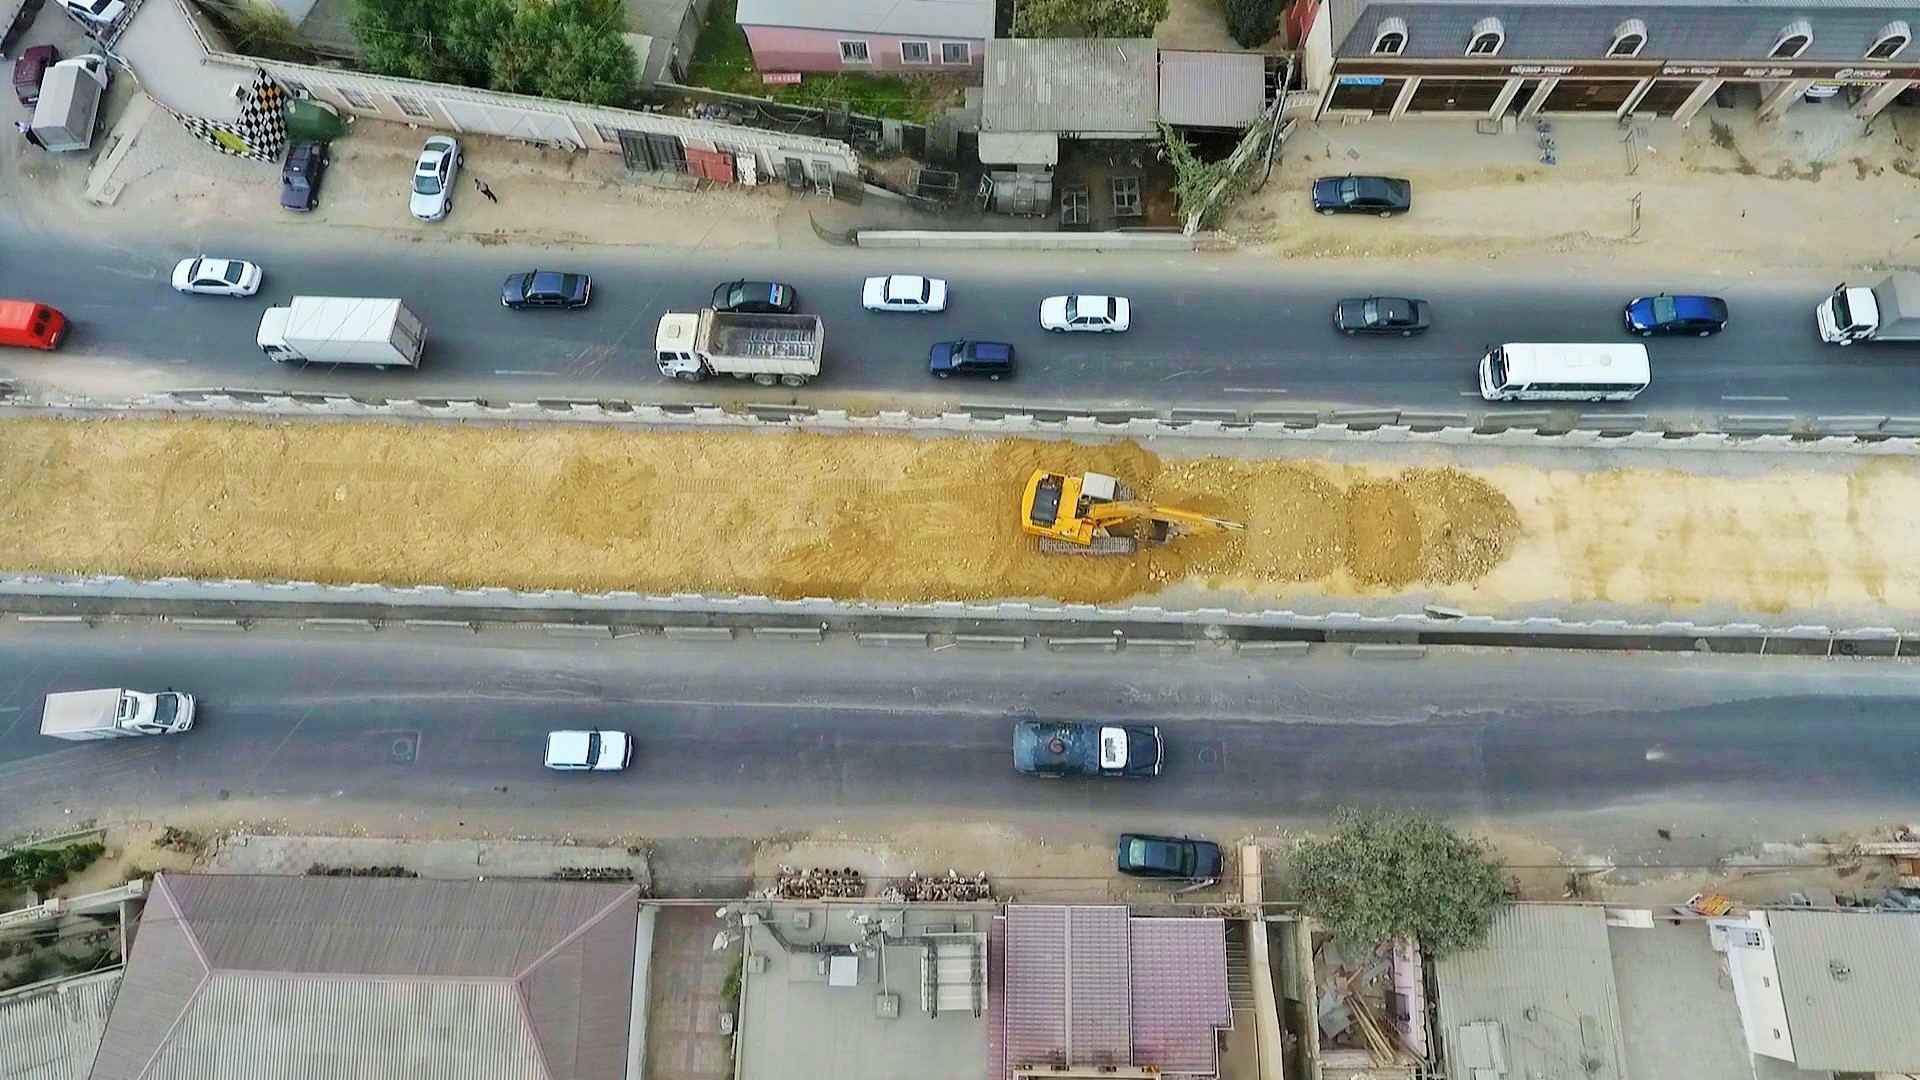 Construction work of new road junction in entrance-exit of Baku nearing completion (PHOTO/VIDEO)